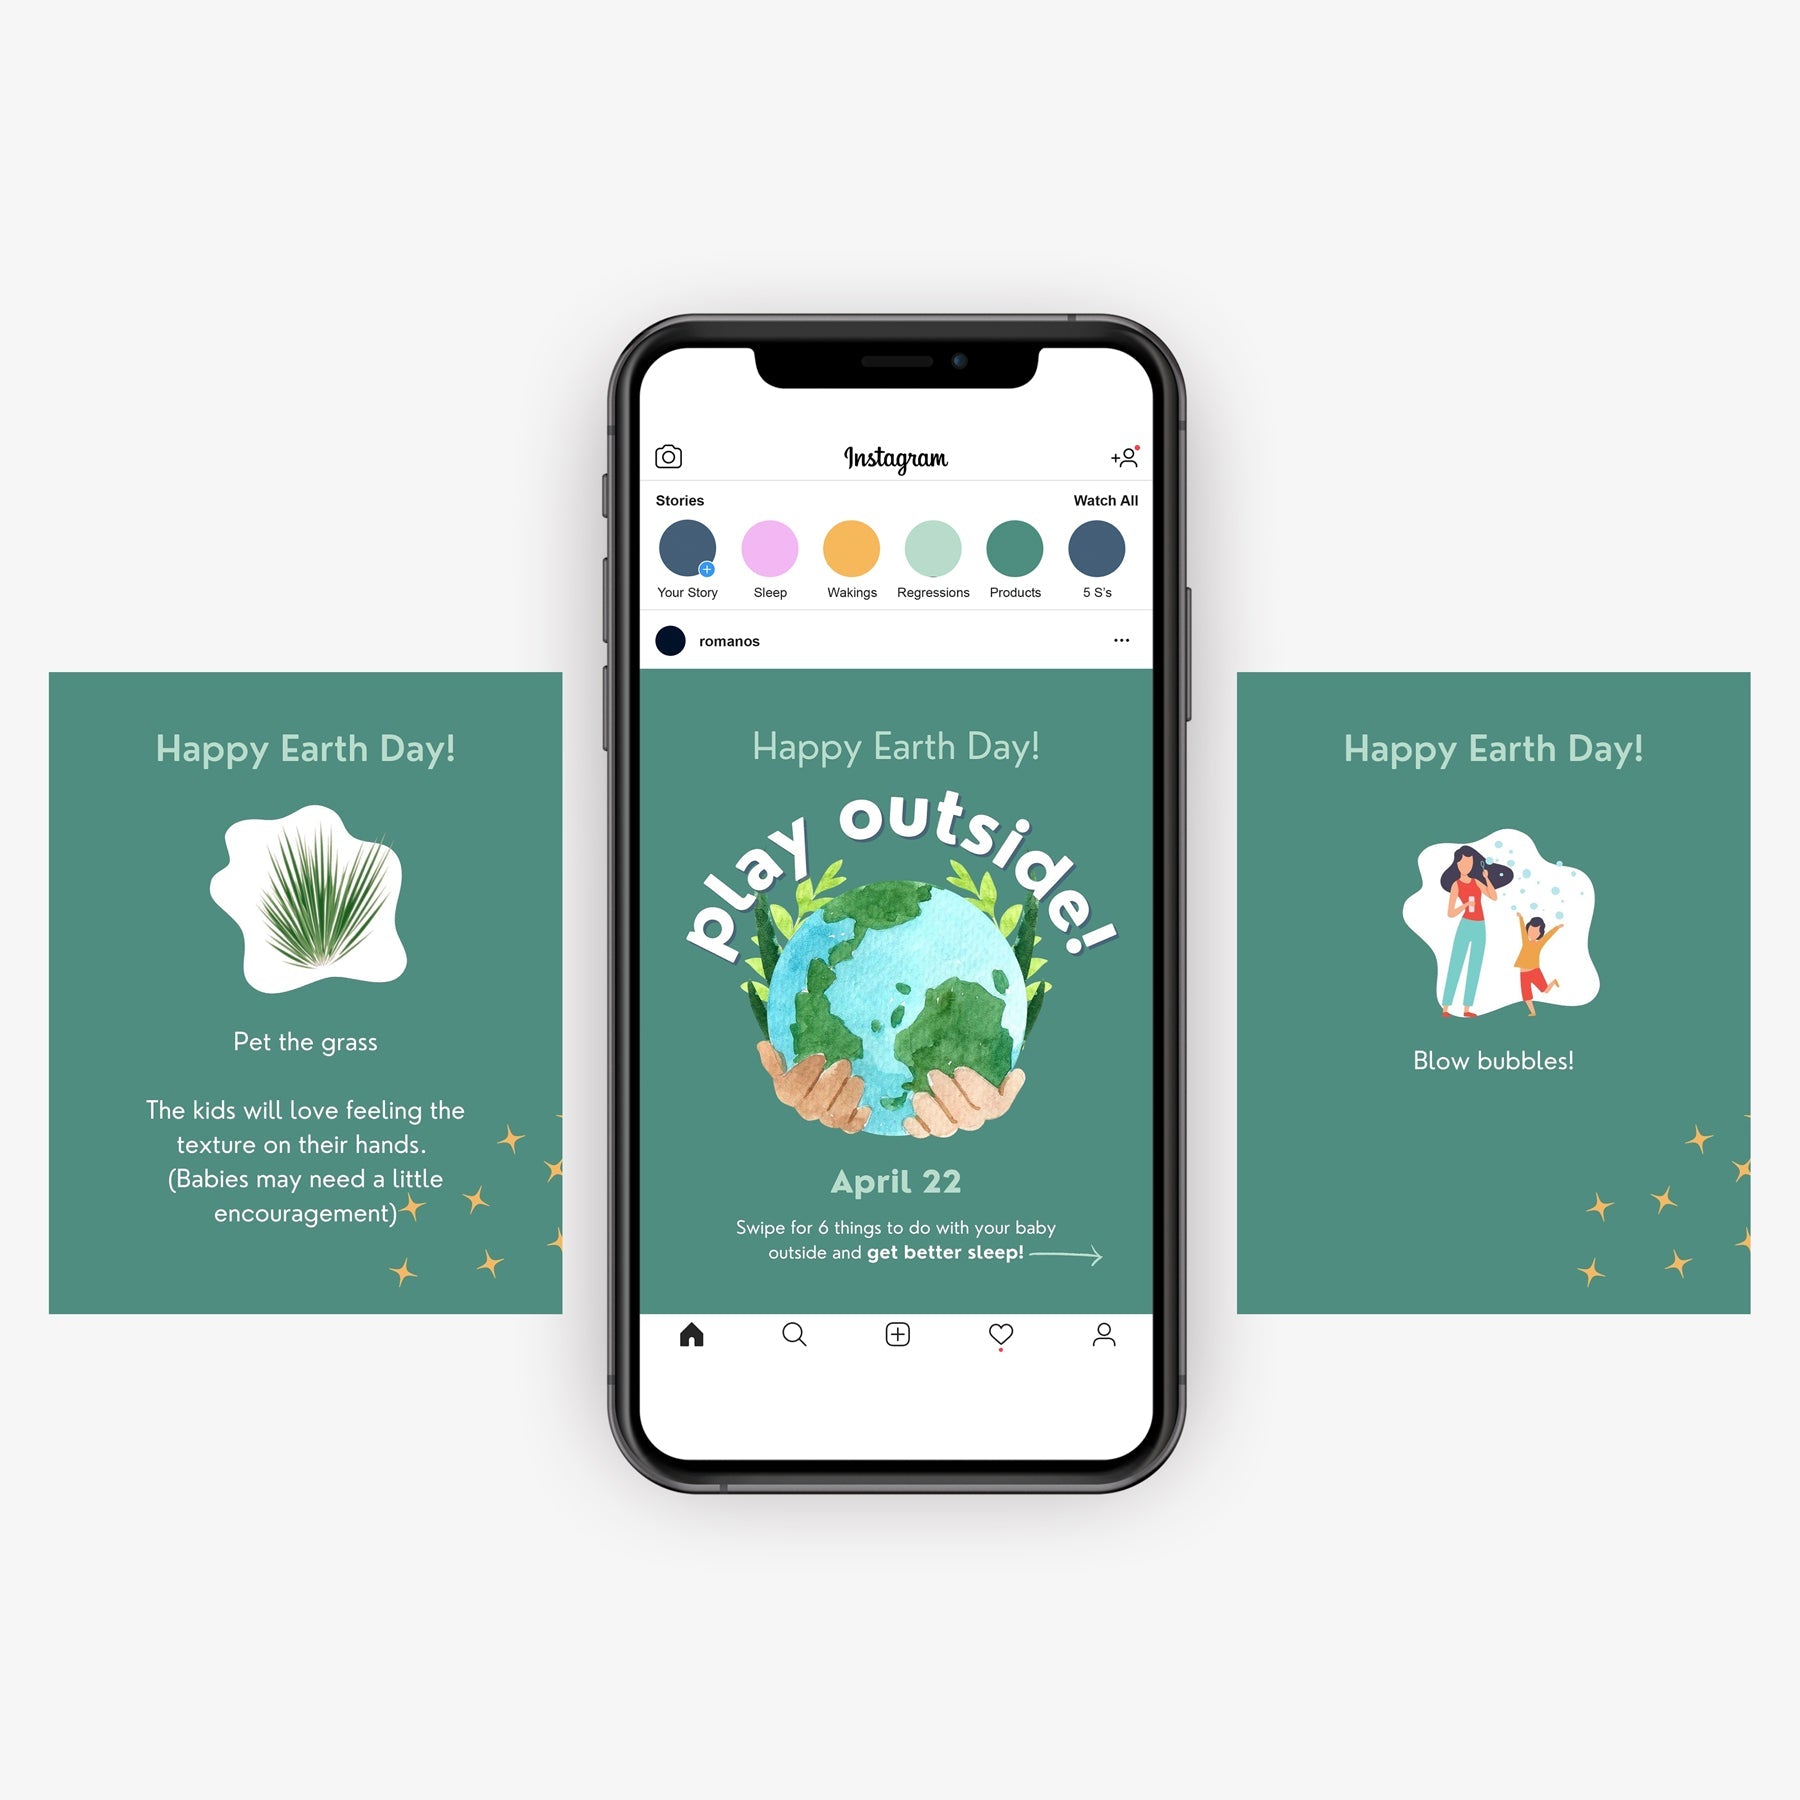 Carousel Post Template - Get Outside (Earth Day)